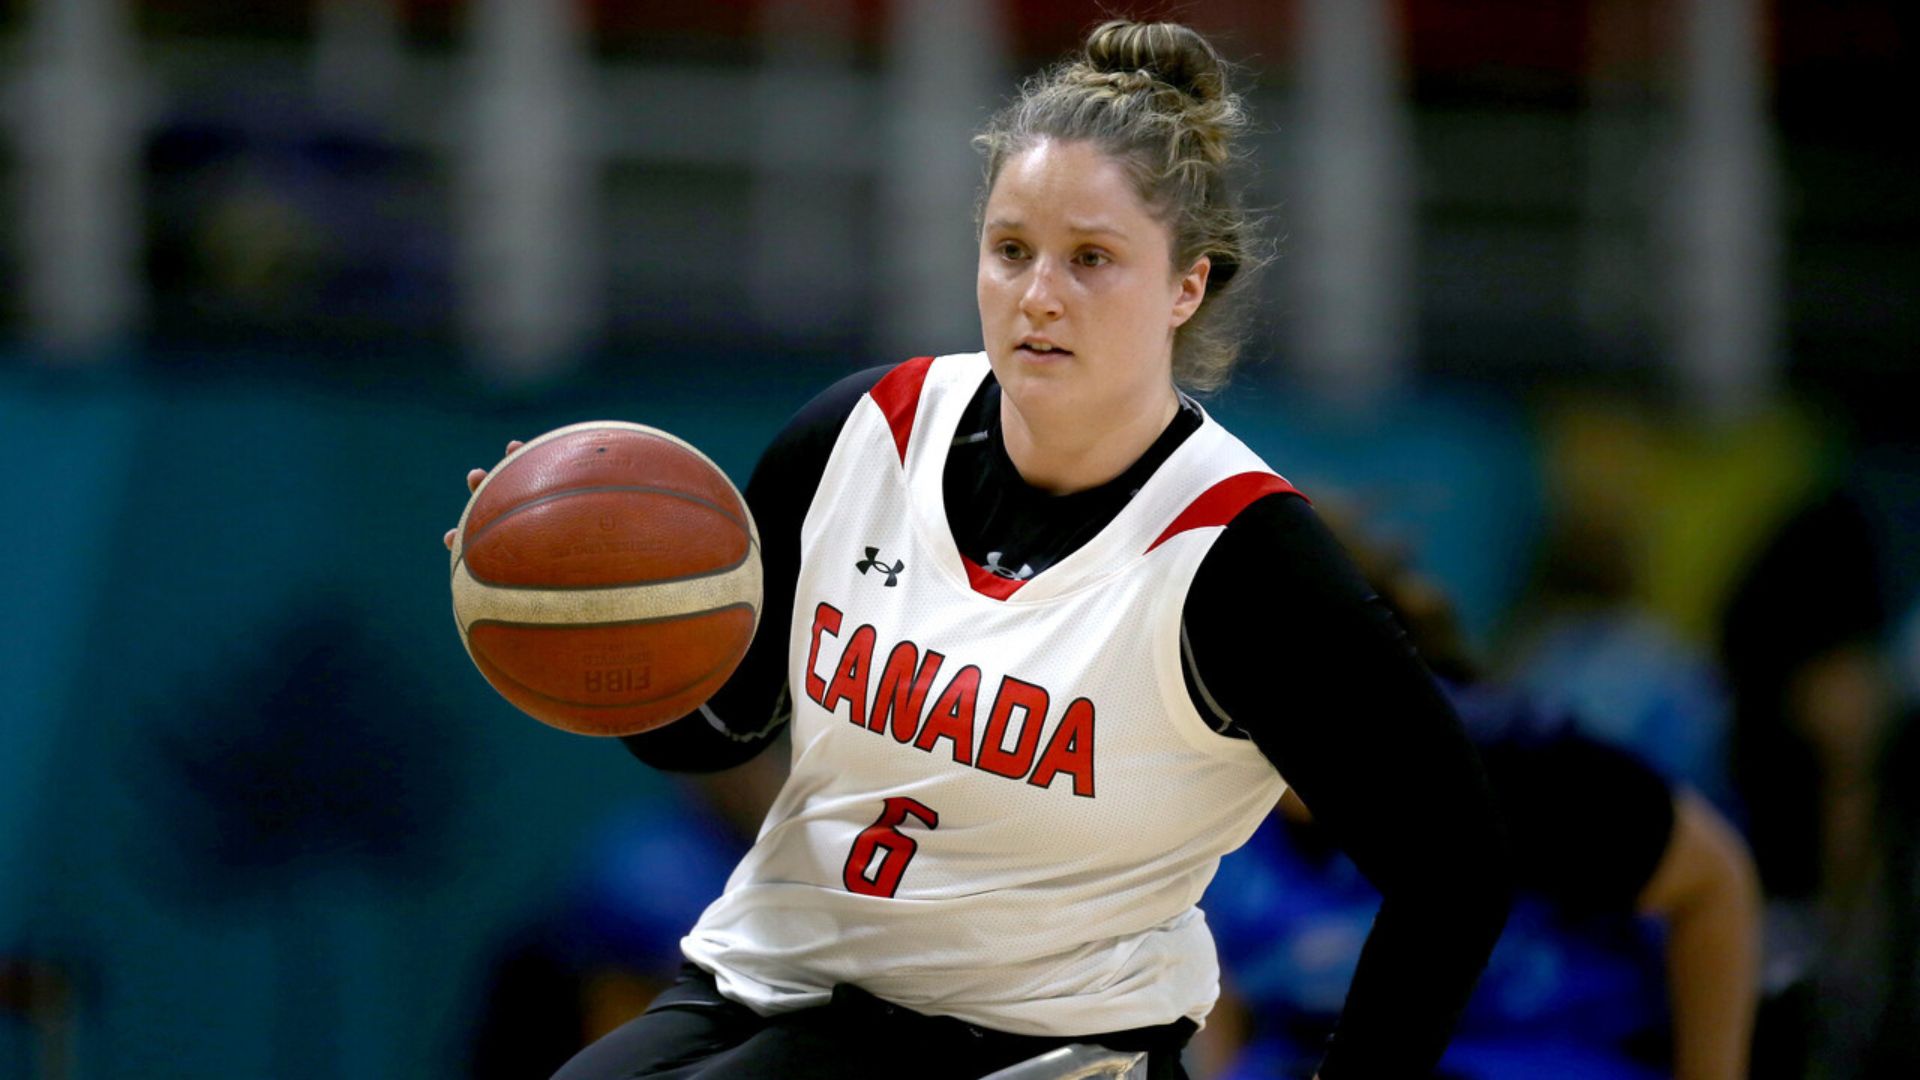 Wheelchair Basketball: Canada's Females also Remain Undefeated